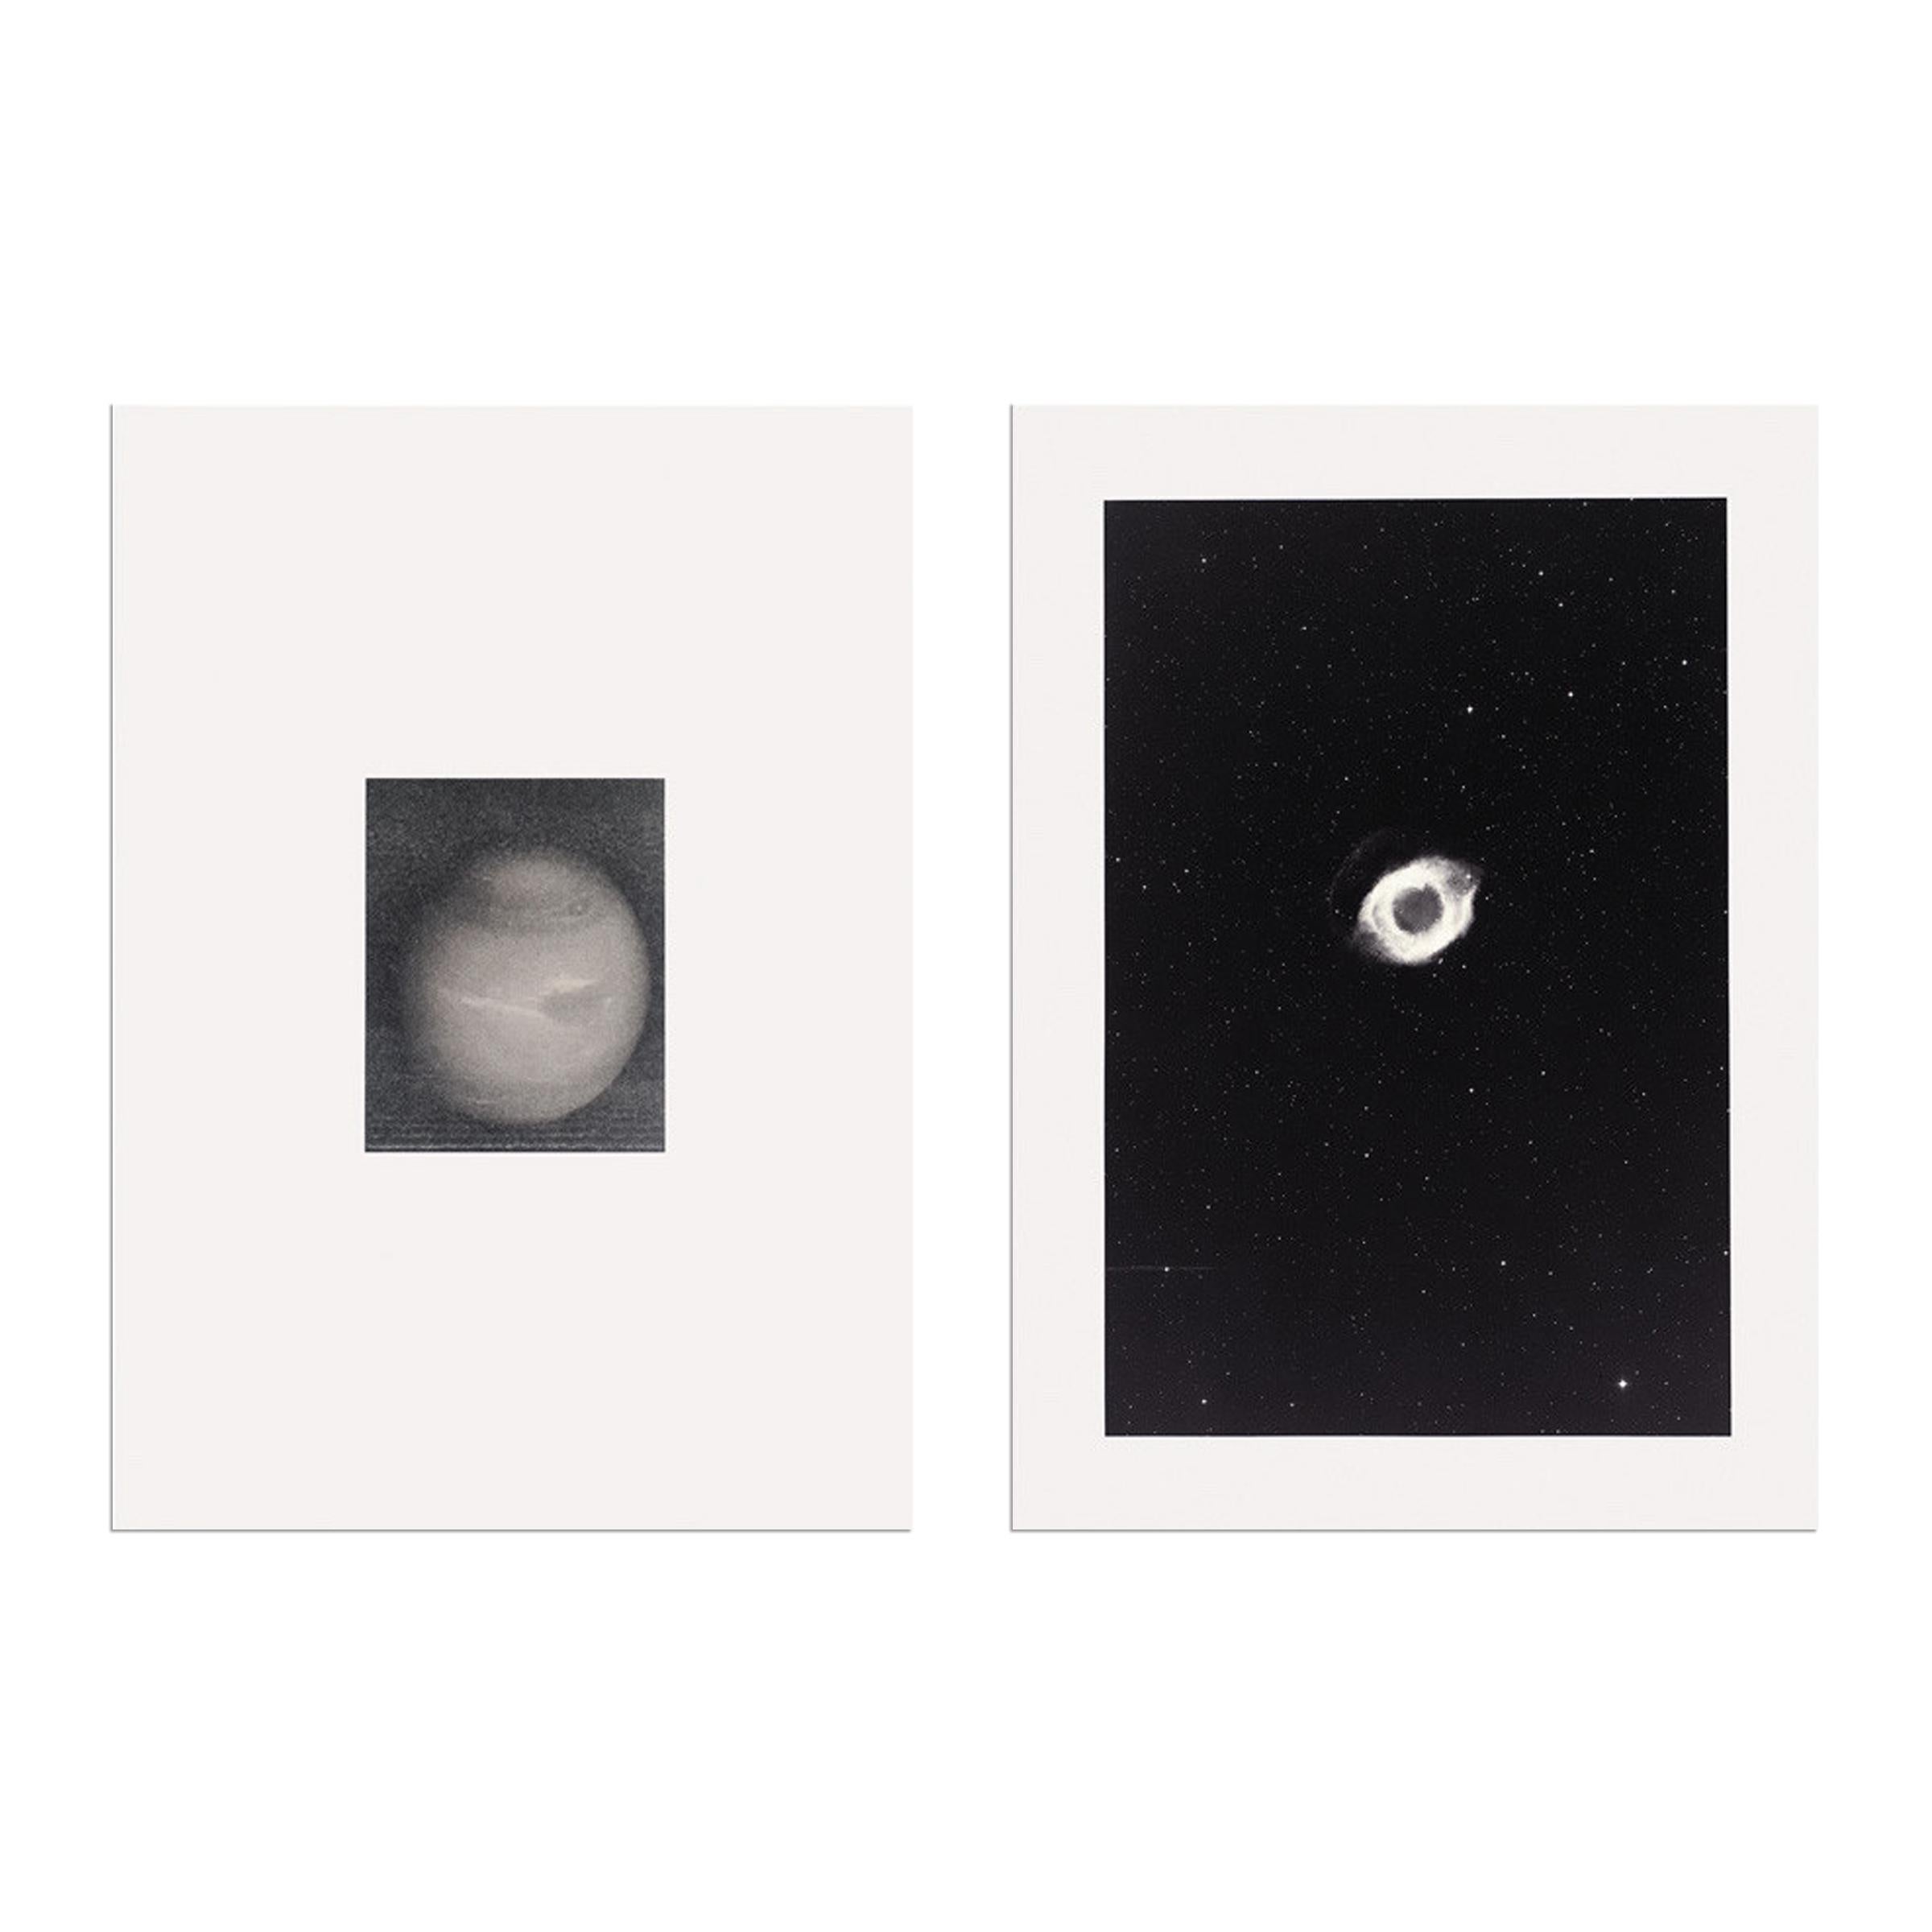 Thomas Ruff (German, b. 1958)
Zeitungsfoto 071, Sterne 22h 24m / -20, 2002
Medium: Two C-prints, mounted on Forex
Dimensions: 59 x 42 cm (23¼ x 16½ in) each
Edition of 45: Hand-signed and numbered each
Condition: Excellent